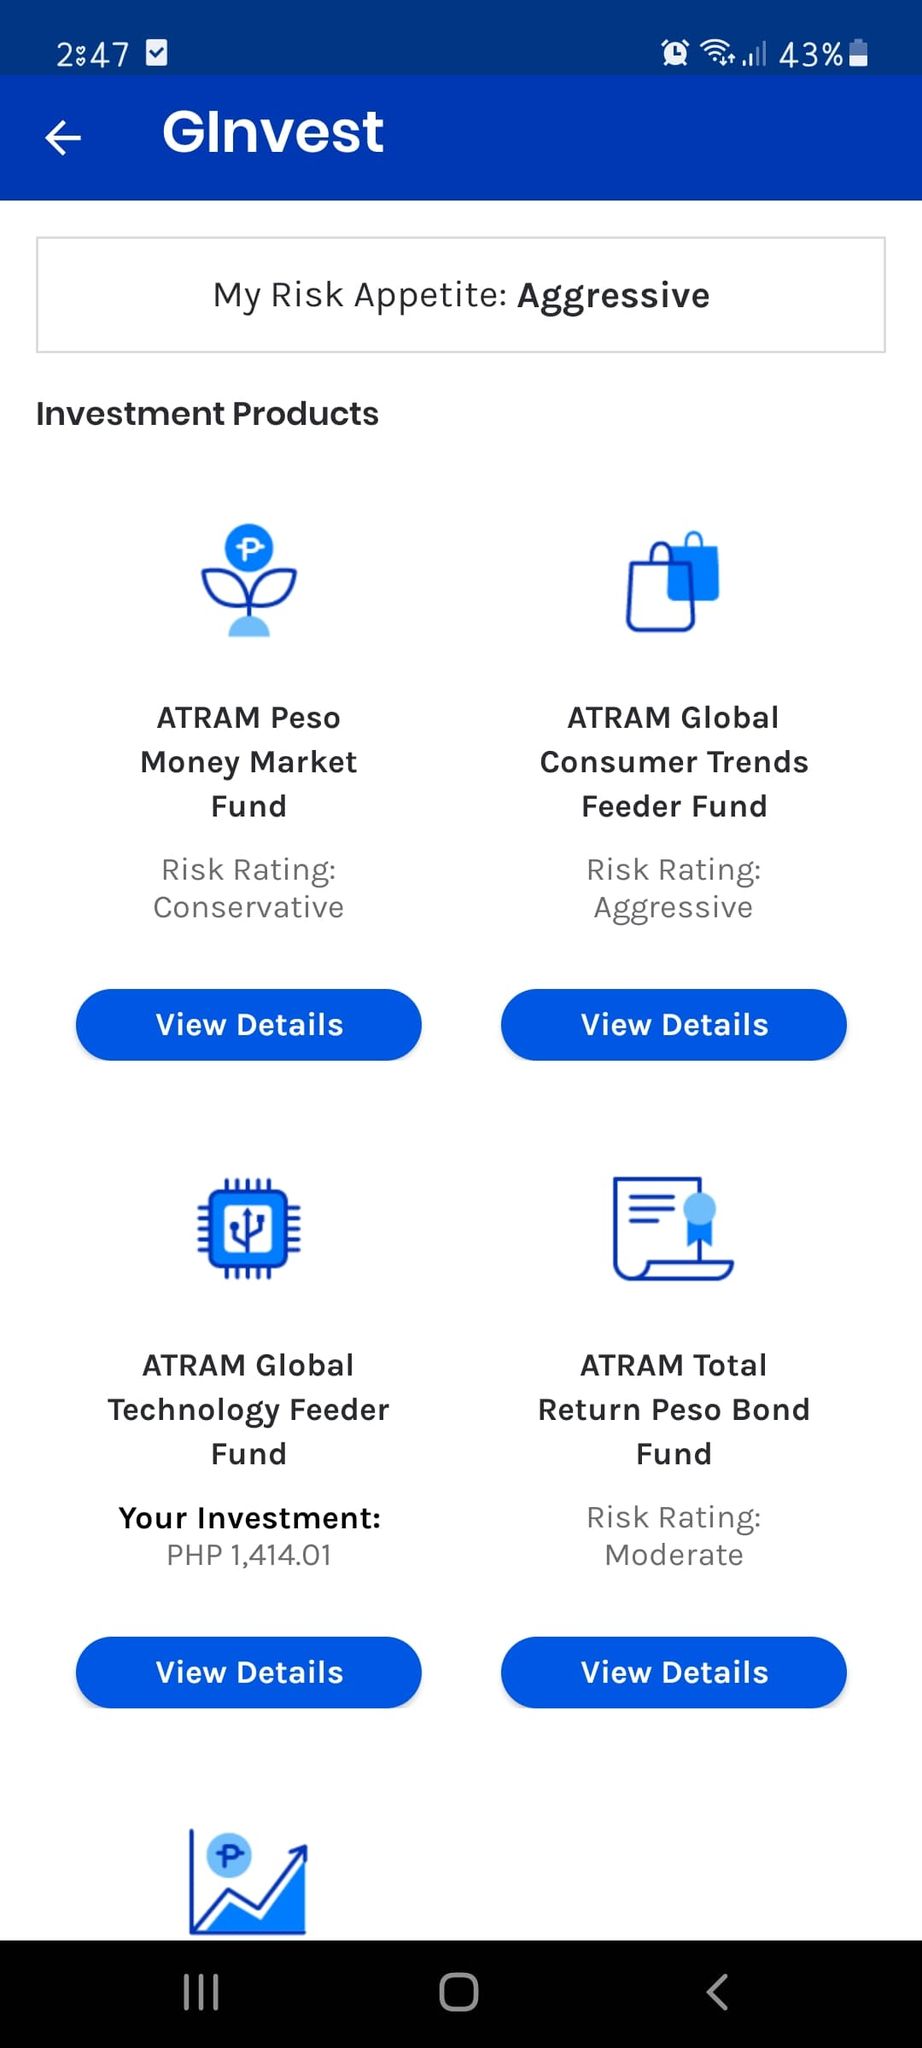 5 Investment Options Available with GCASH’s GInvest